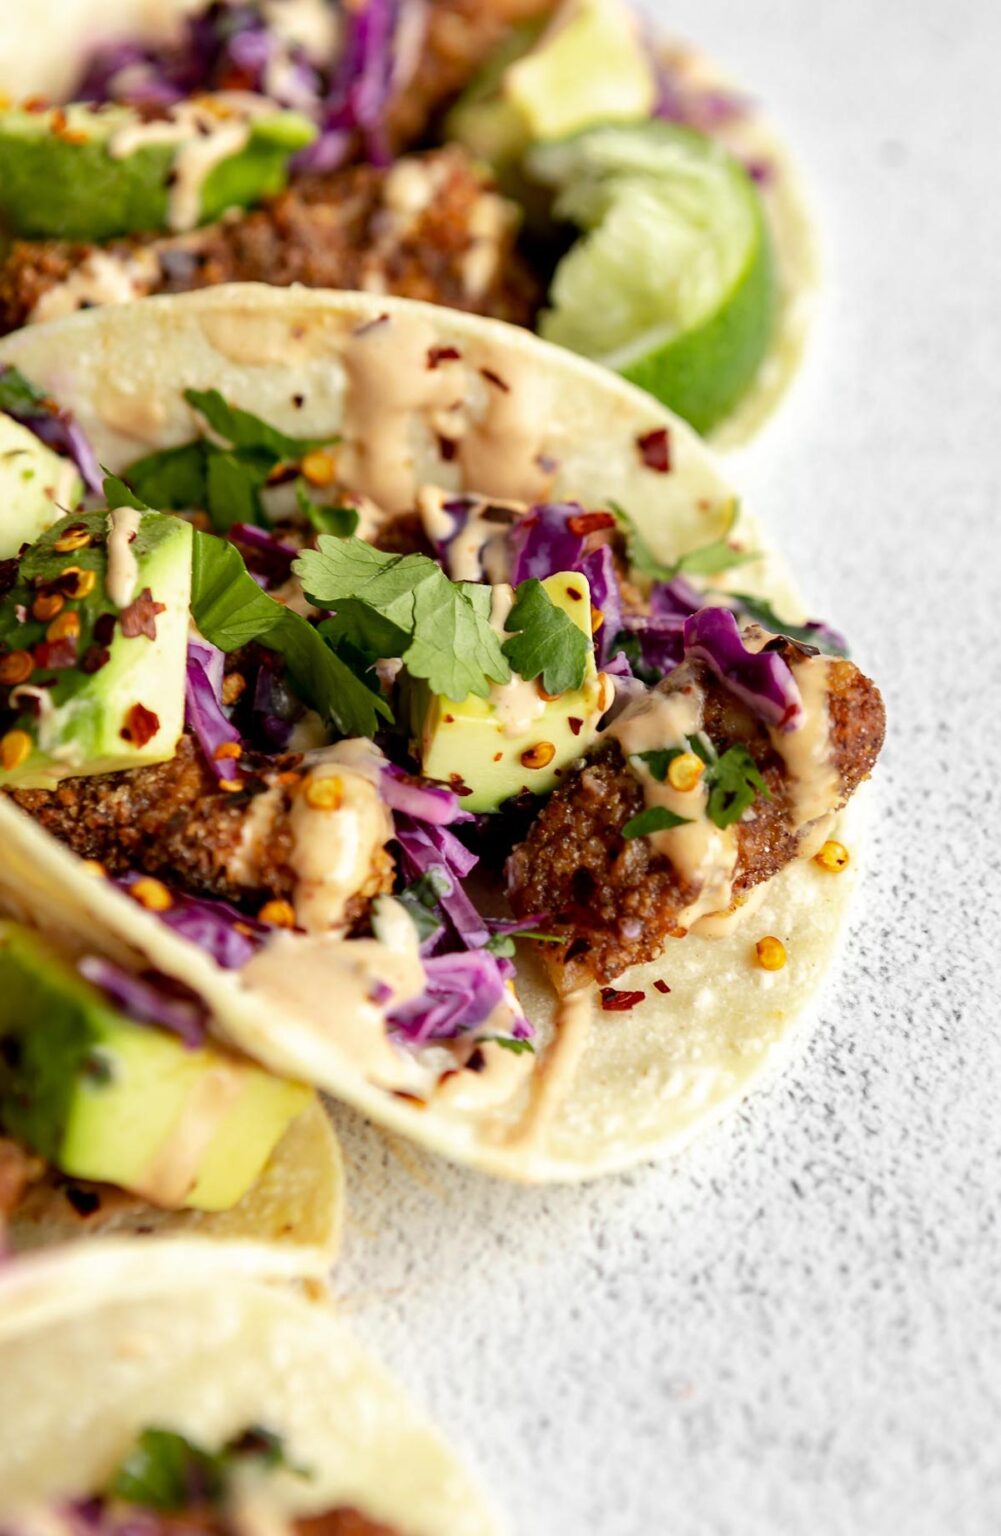 Gluten Free Fish Tacos - Eat With Clarity